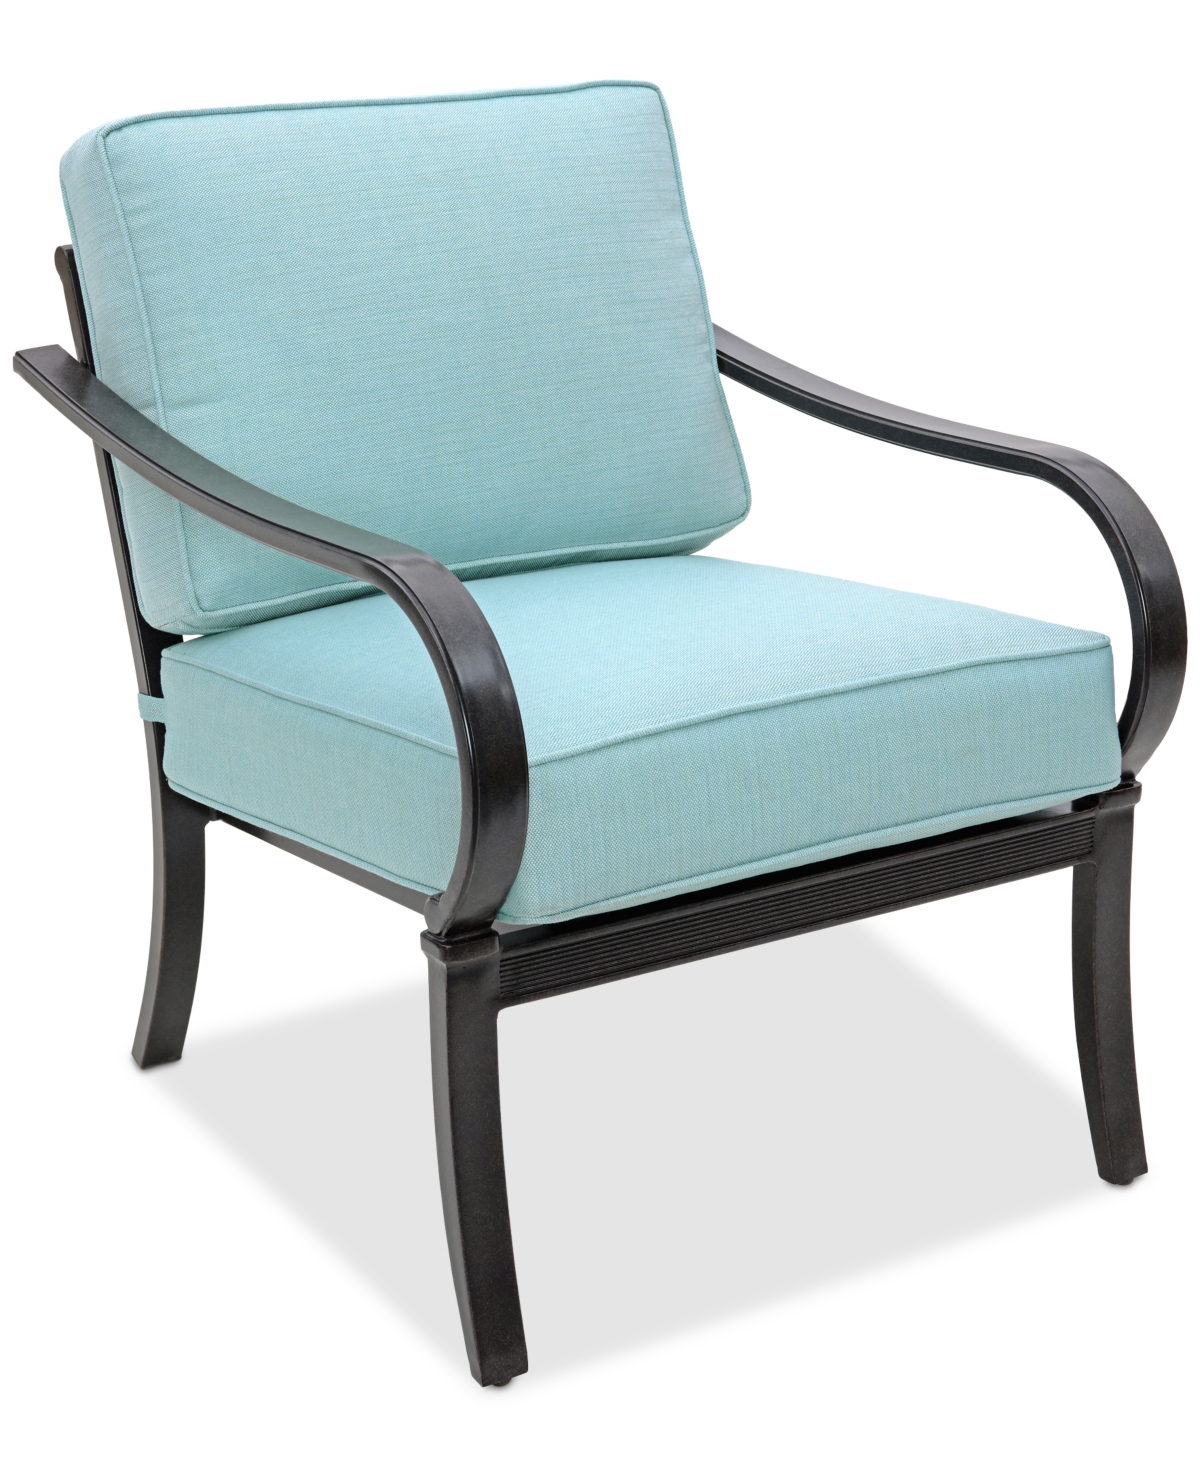 Shop Agio St Croix Outdoor 2-pc Lounge Chair Set In Spa Light Blue